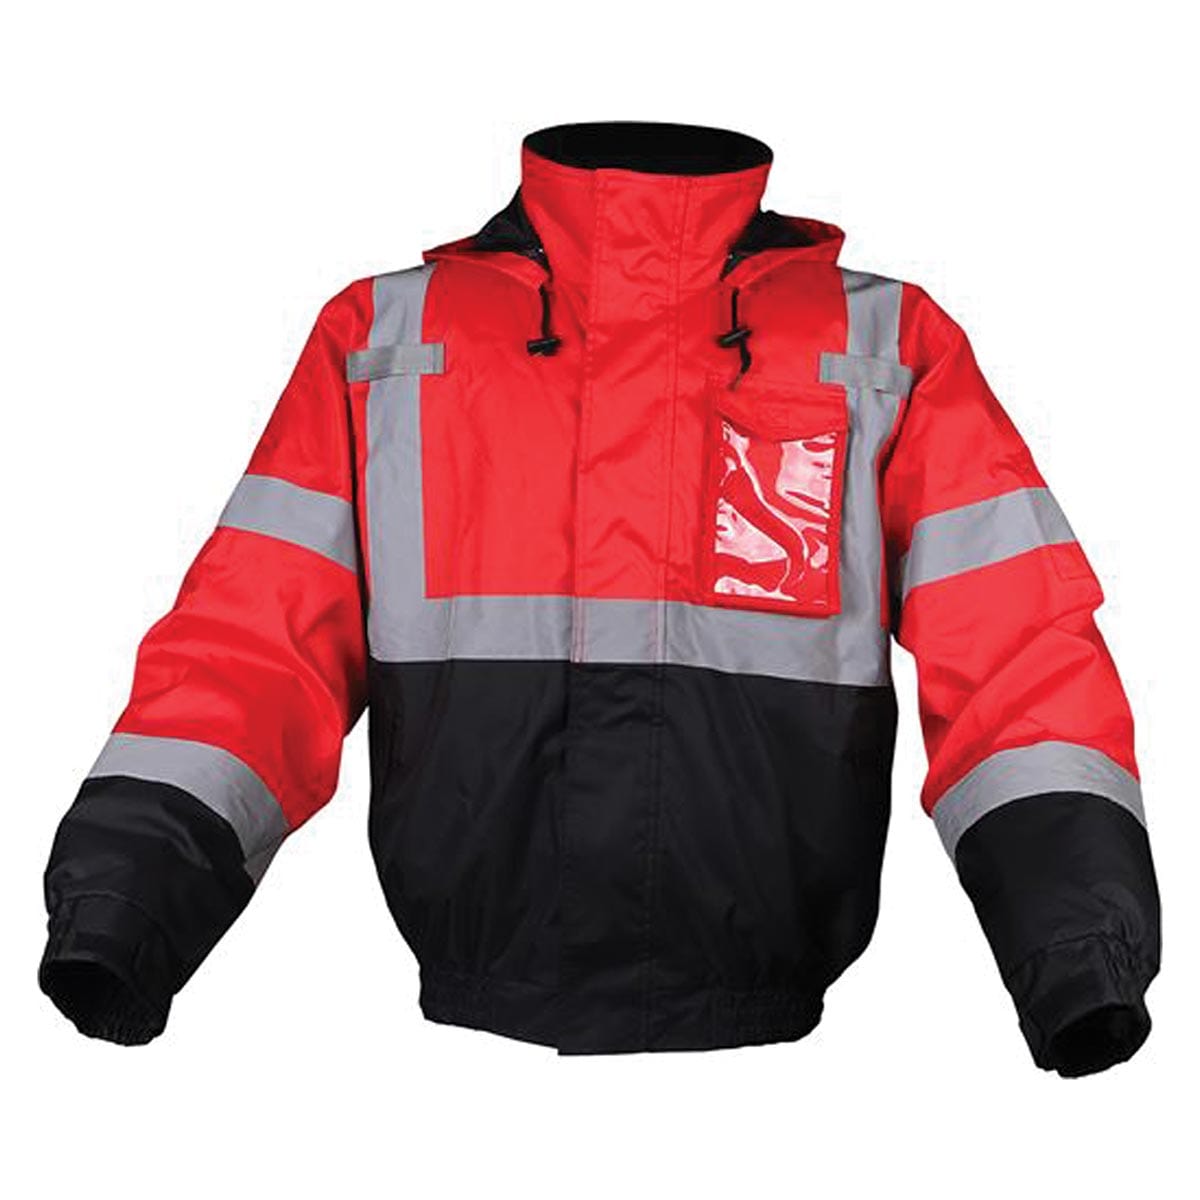 GSS Safety Non-ANSI Multi-Color Waterproof Enhanced Visibility Bomber Jacket w/ Black Bottom